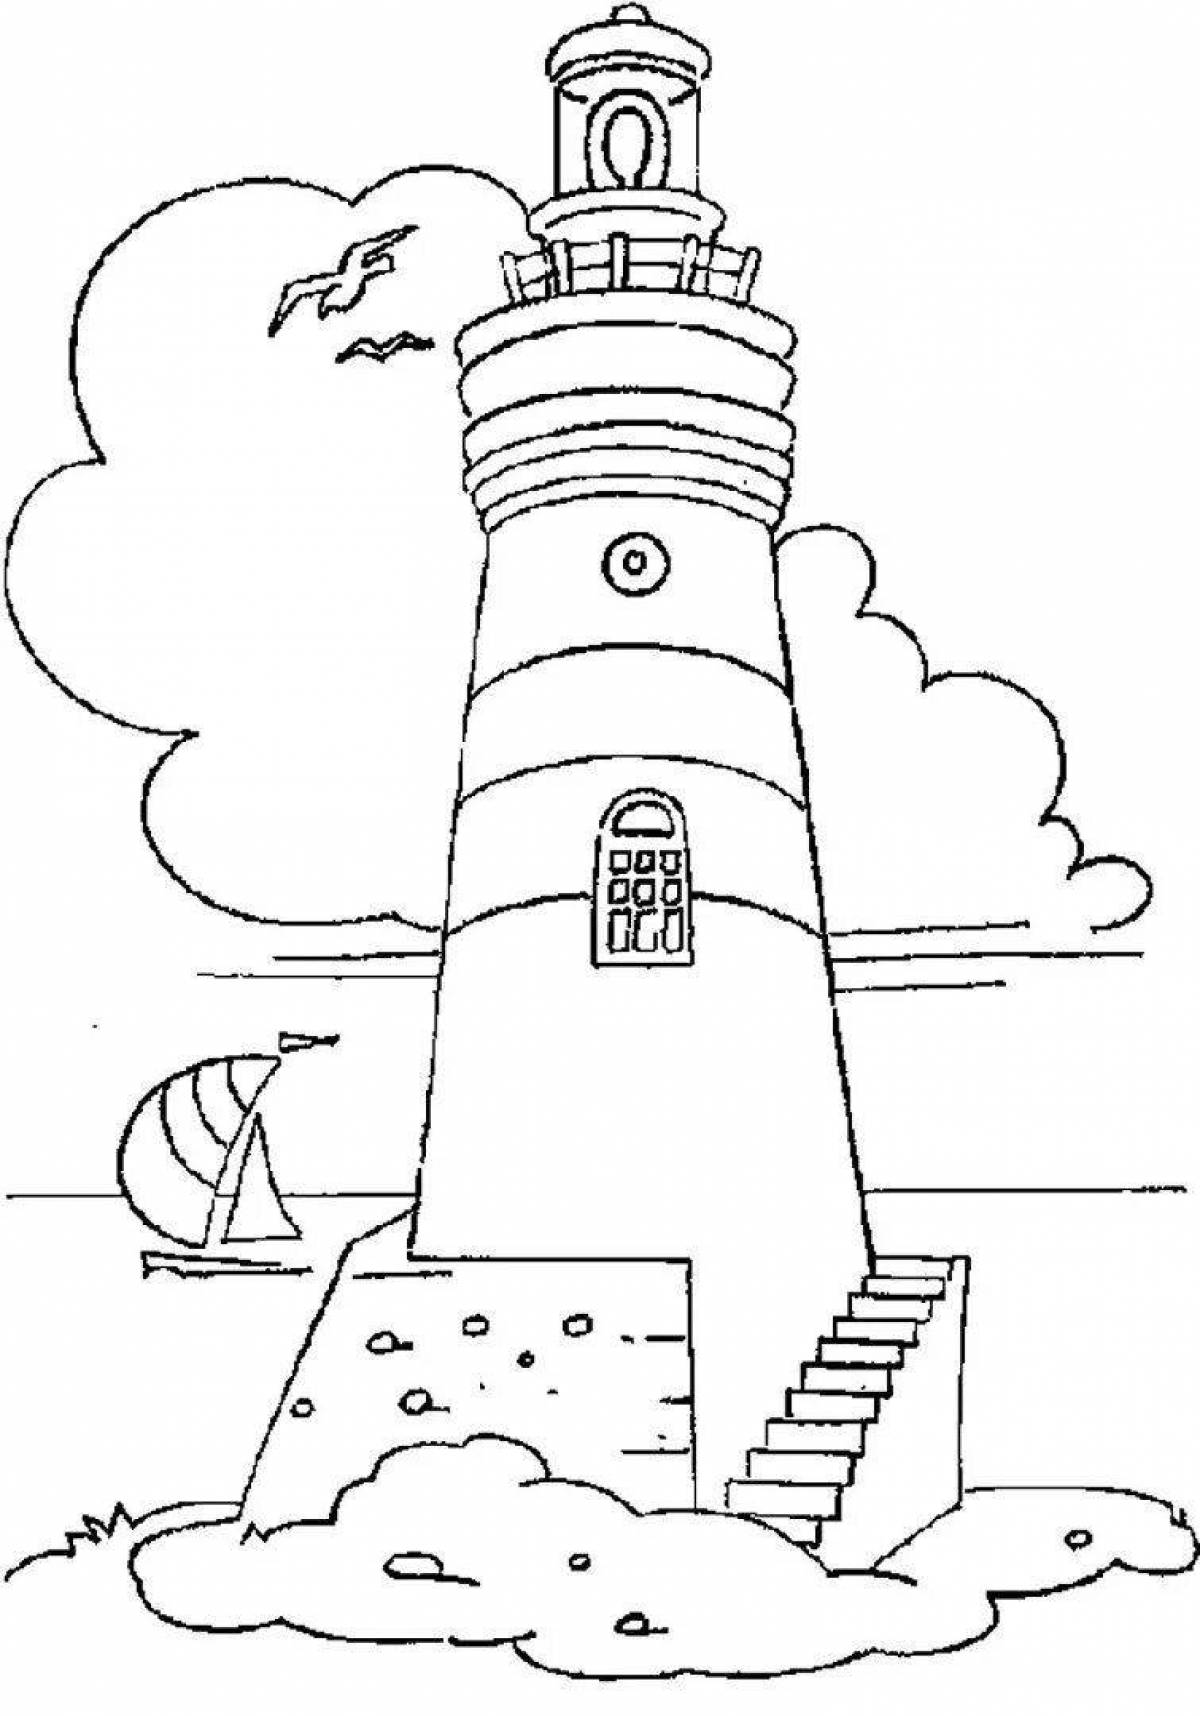 Amazing Crimea coloring pages for elementary school children